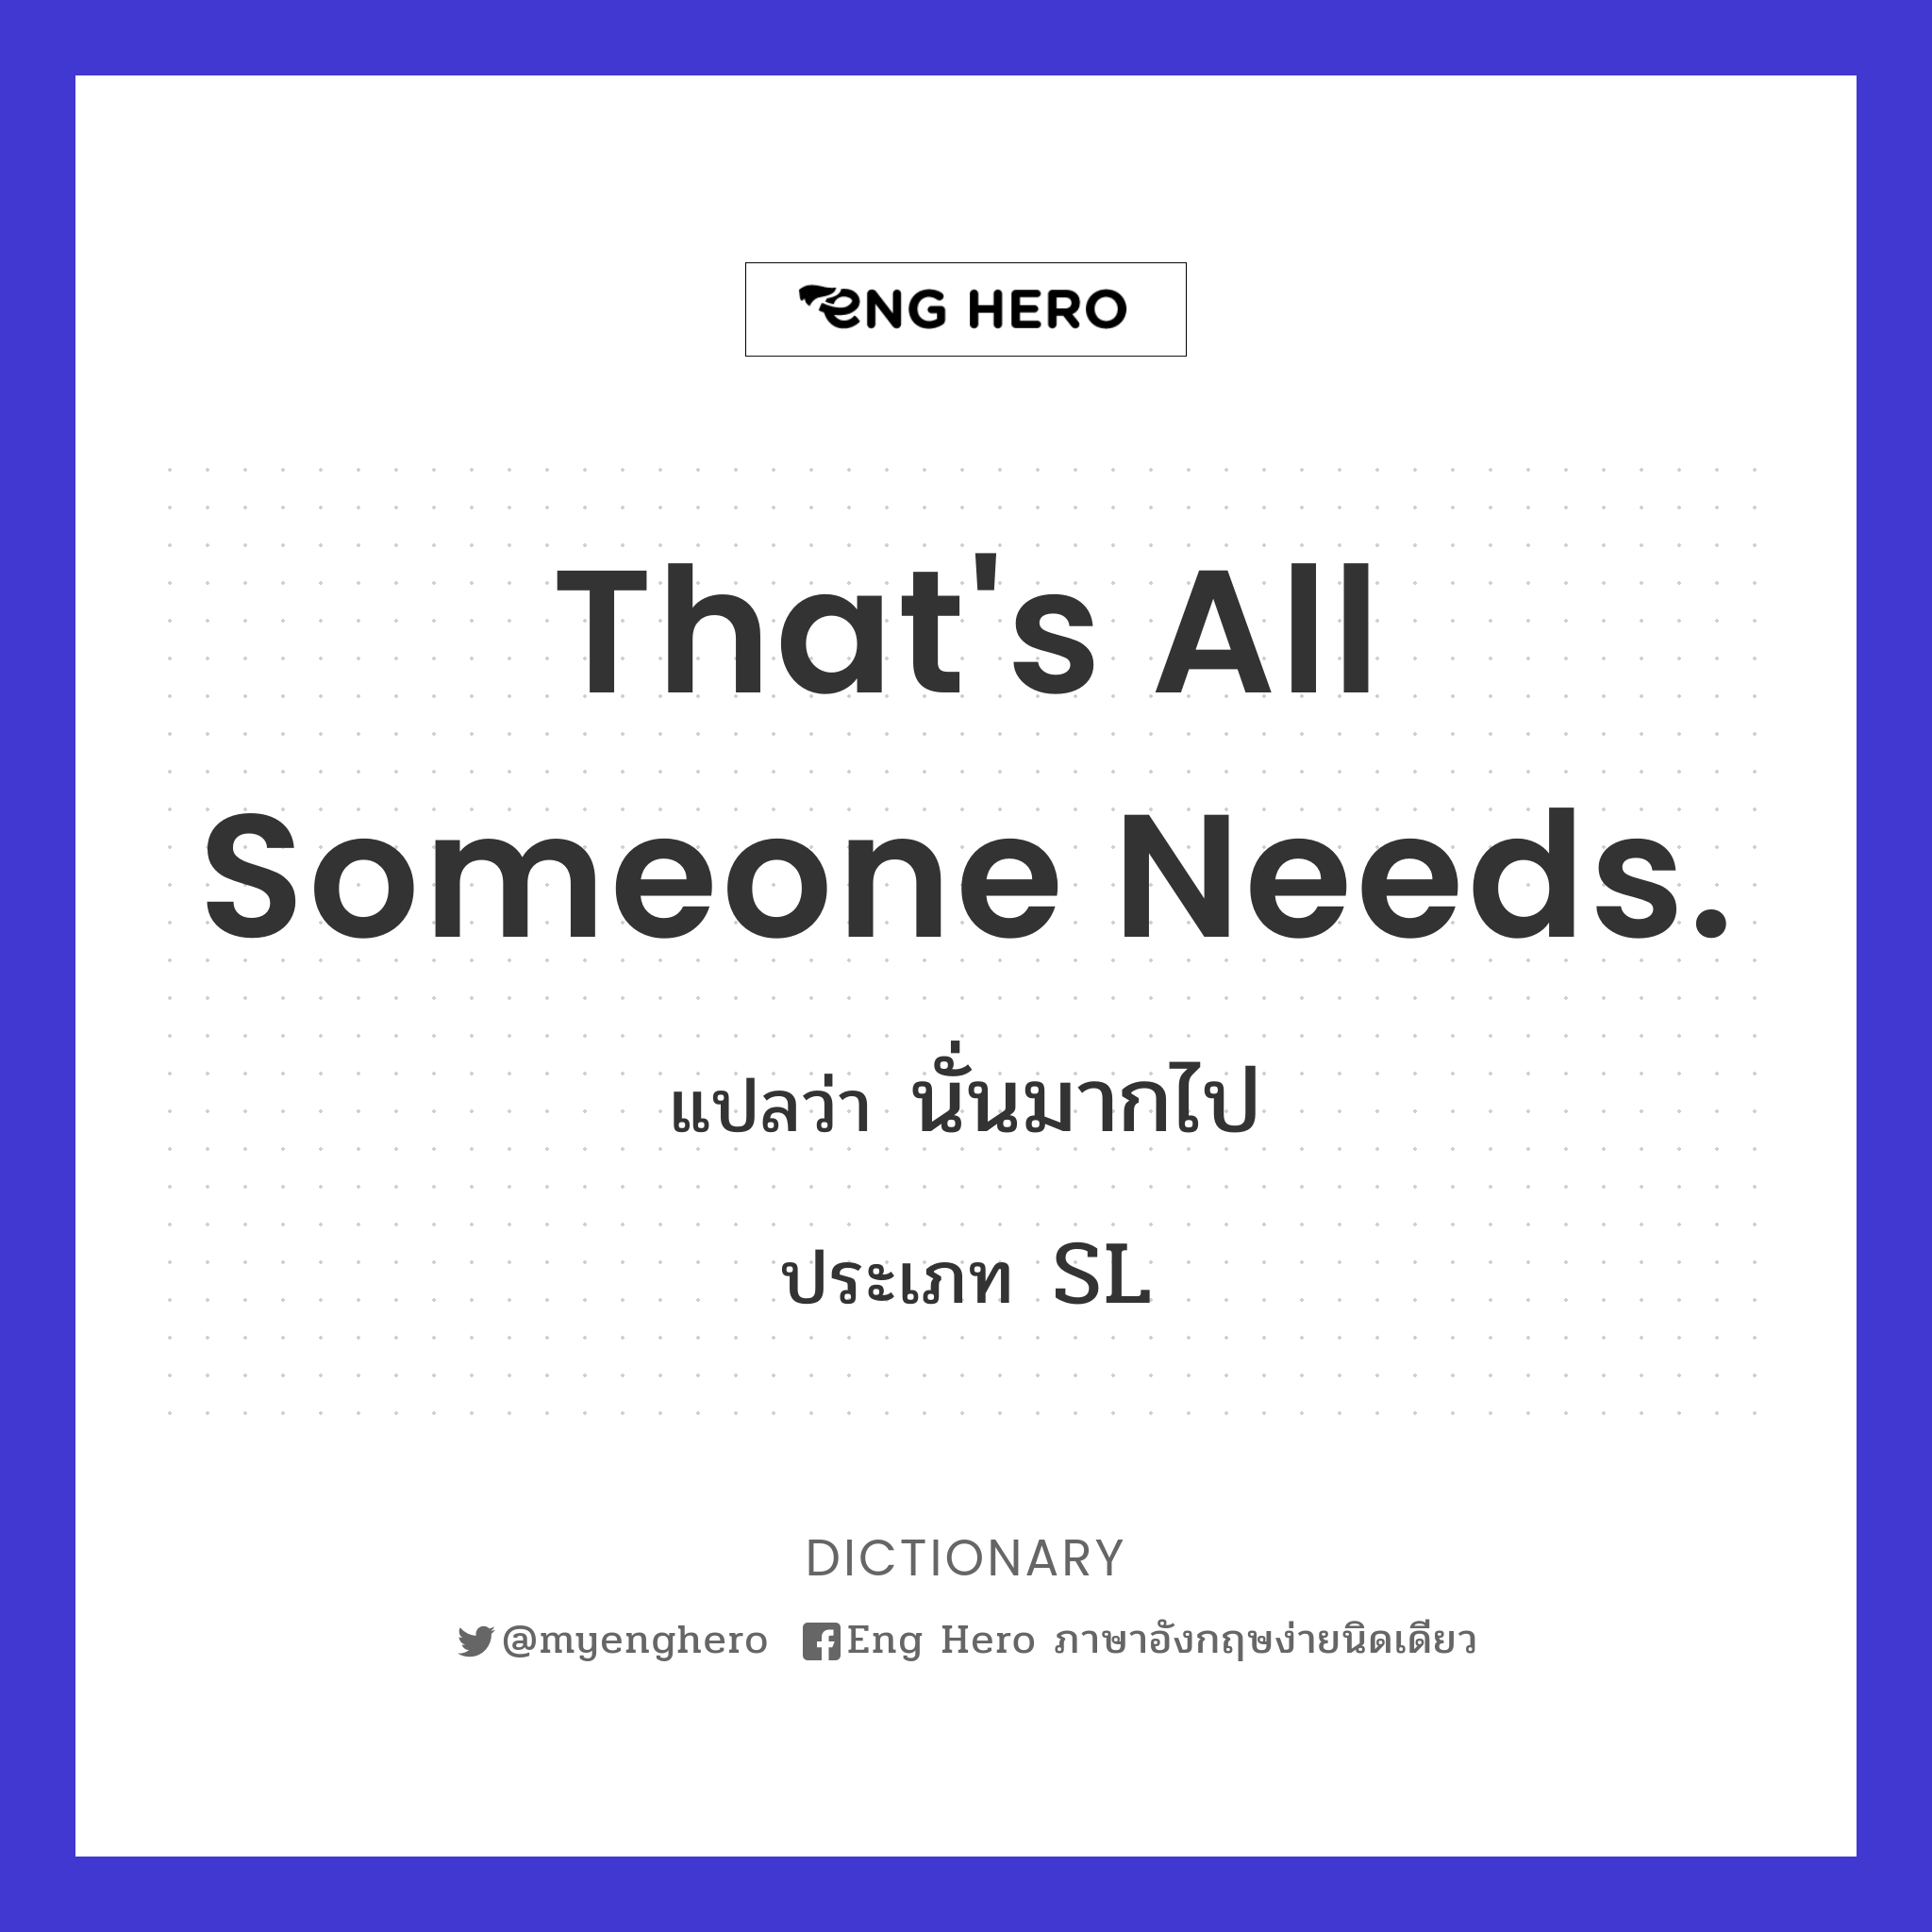 That's all someone needs.